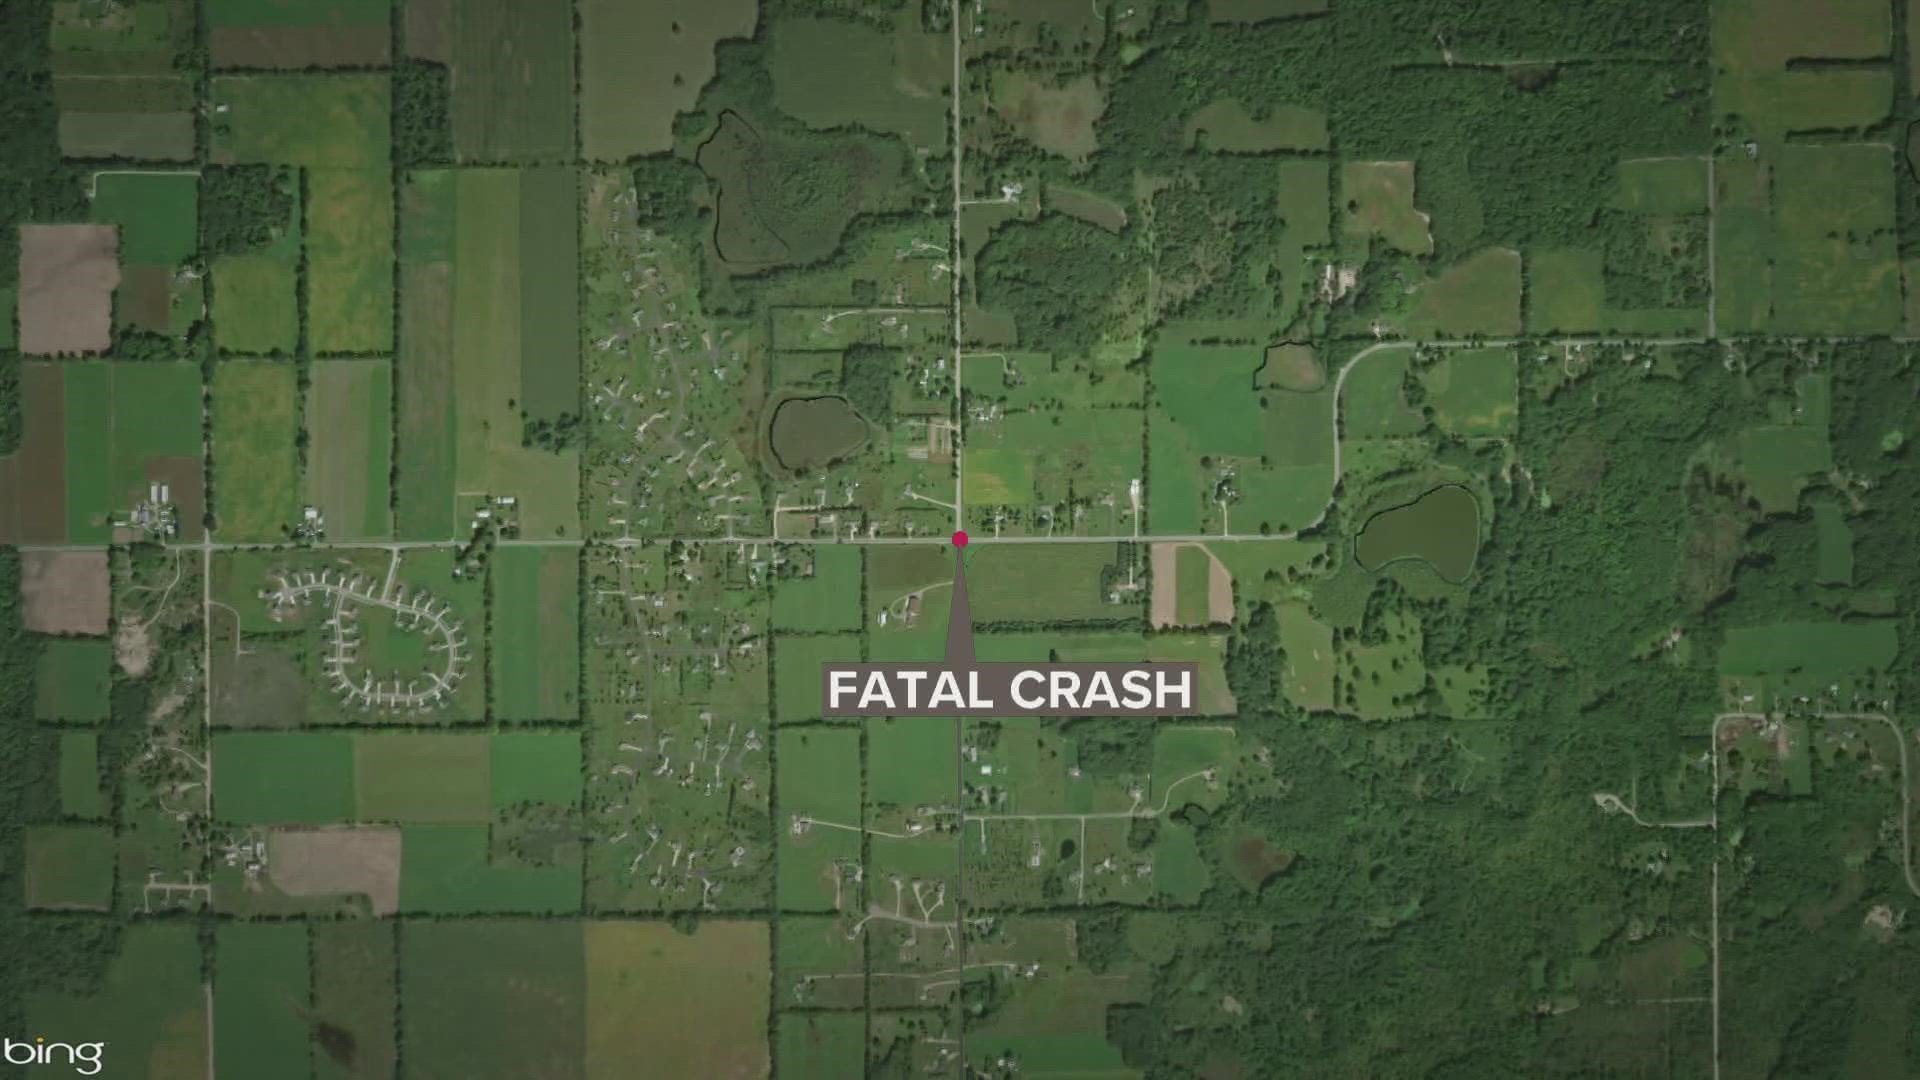 The Kent County Sheriff's Office says the crash happened Sunday night at the intersection of Algoma Avenue and 20 Mile Road in Solon Township.